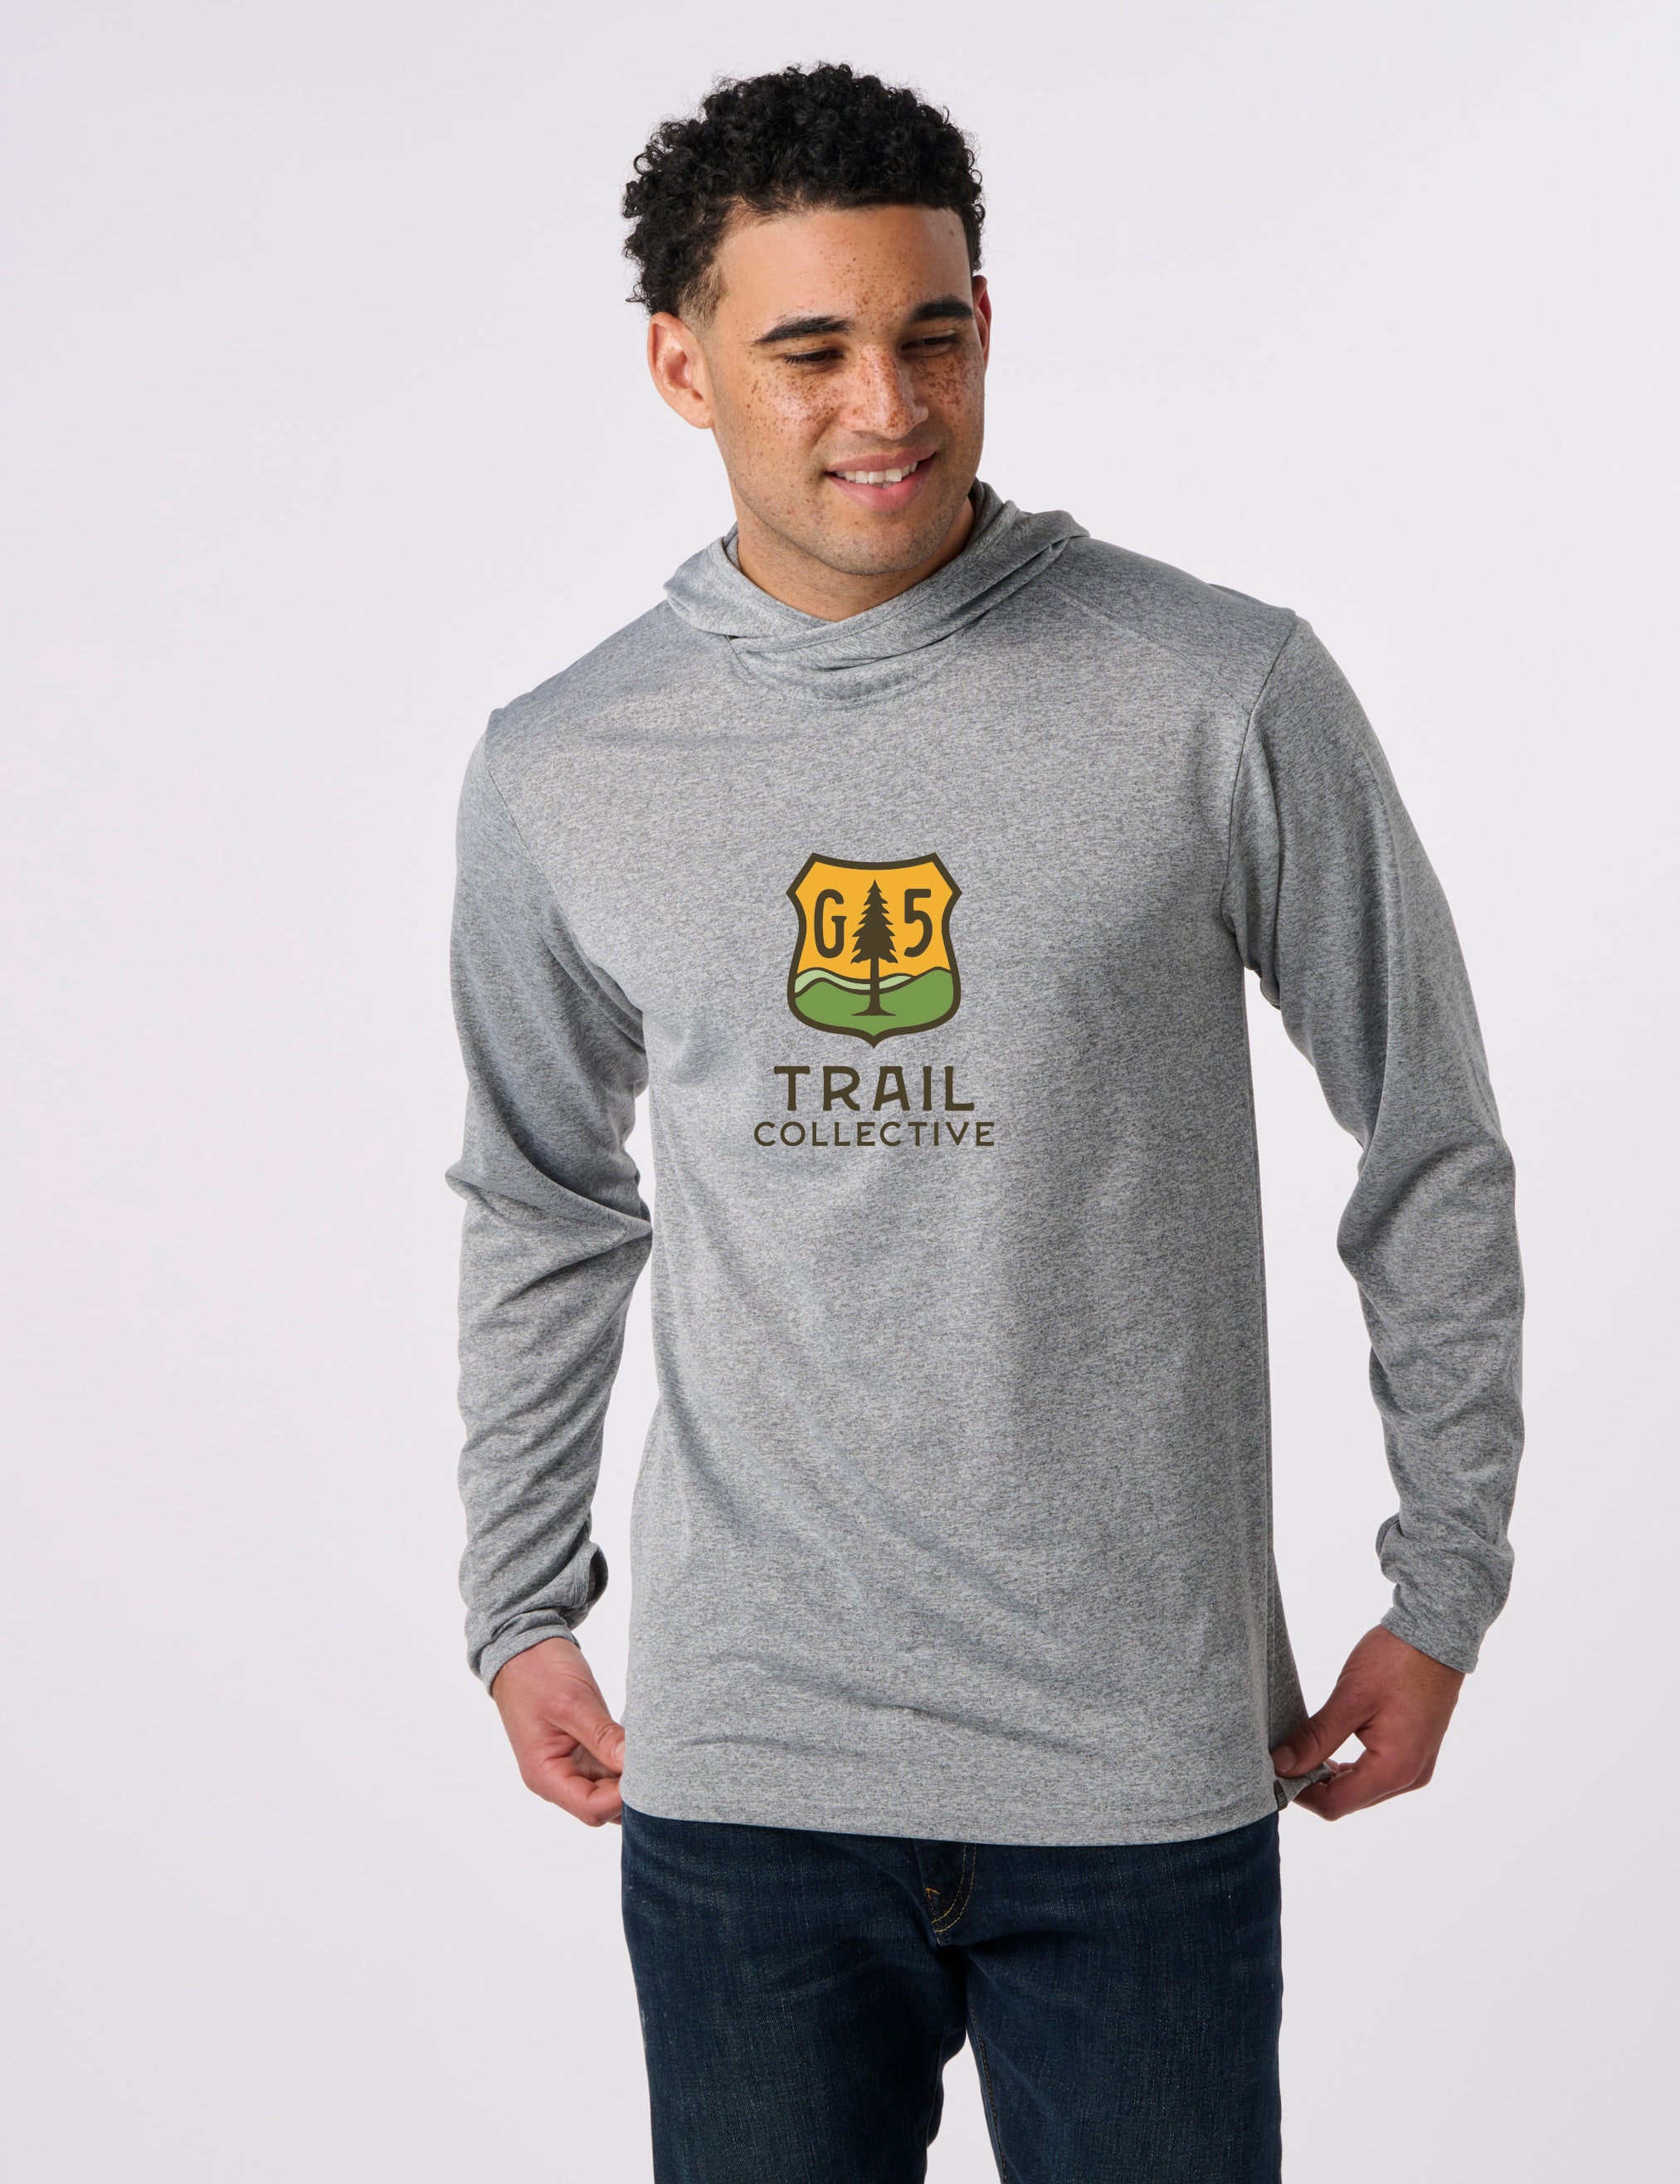 RECOVER_RD4000_SPORTSUNHOODIE_GREYHEATHER_FRONT_34e6f59d-ff14-461a-ba37-4497566c3a21.jpg